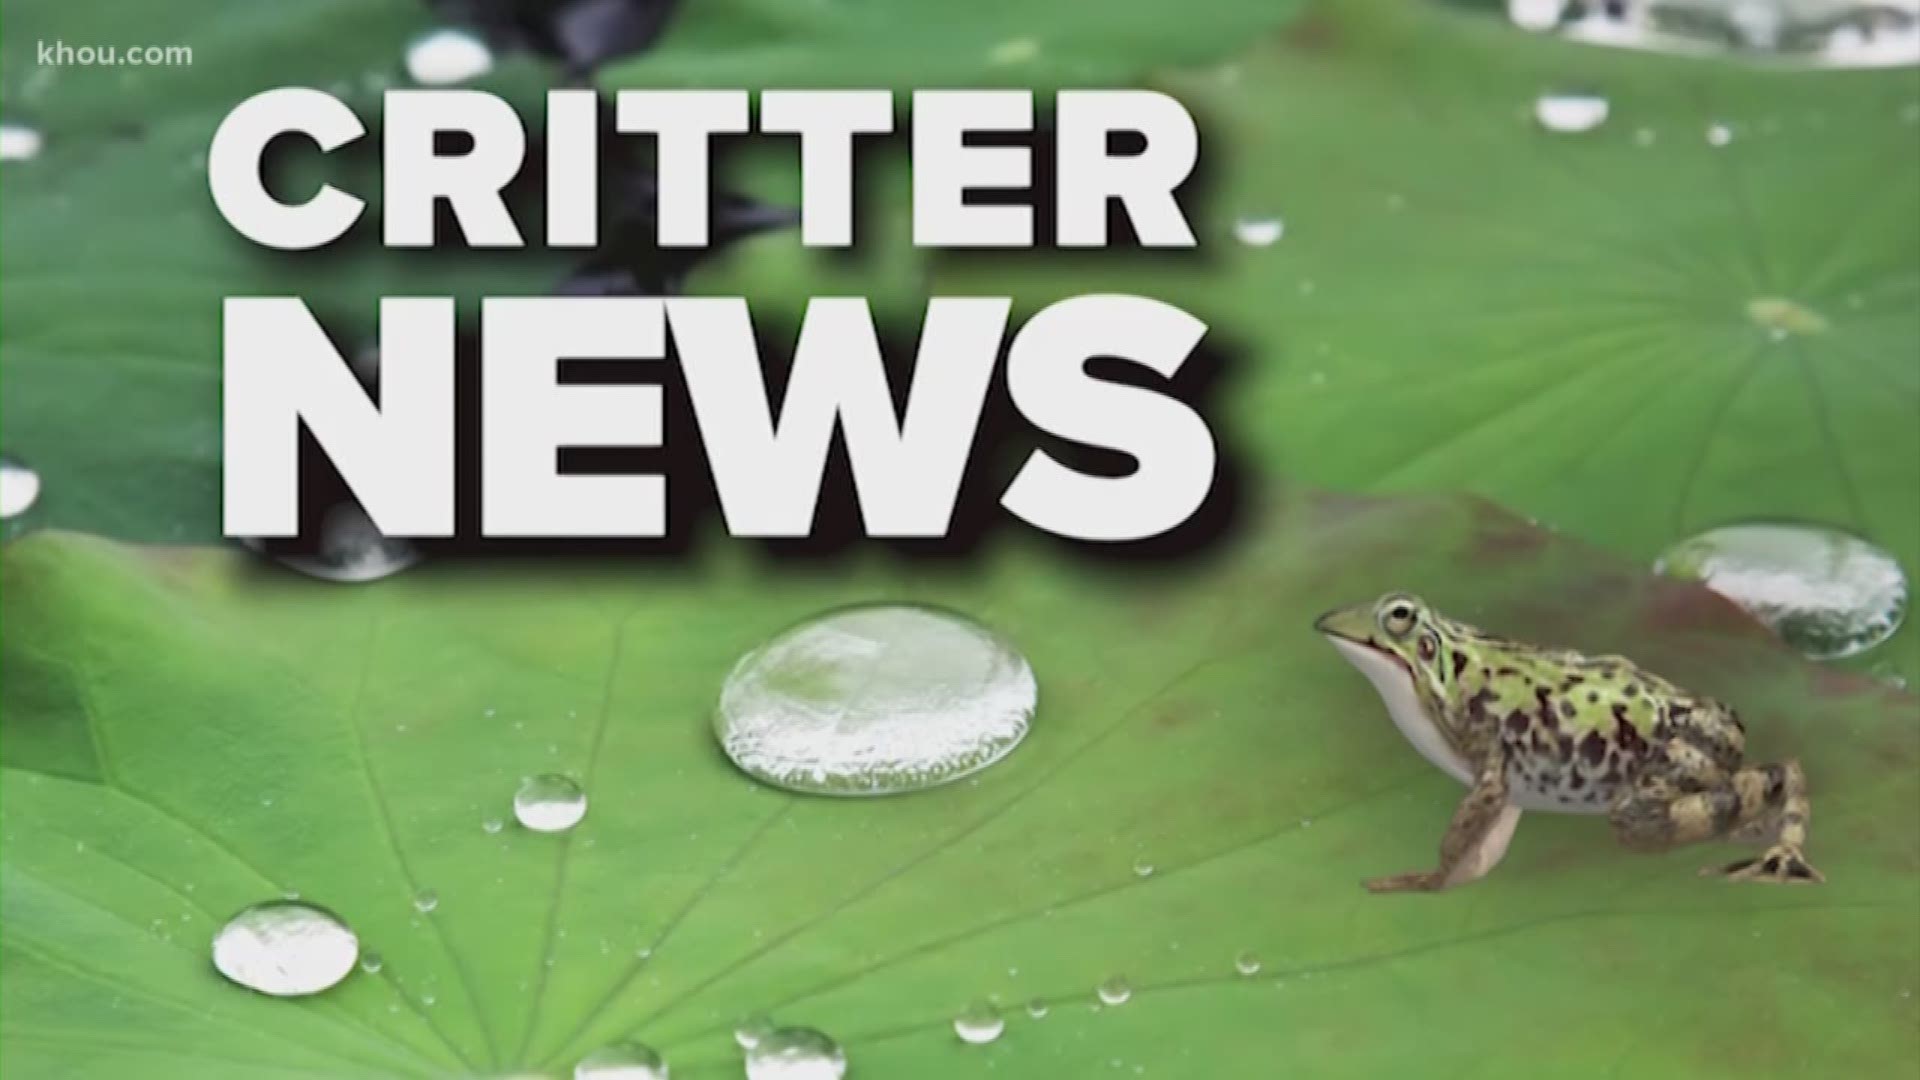 Let's see what wild adventures we can find in this edition of "critter news."